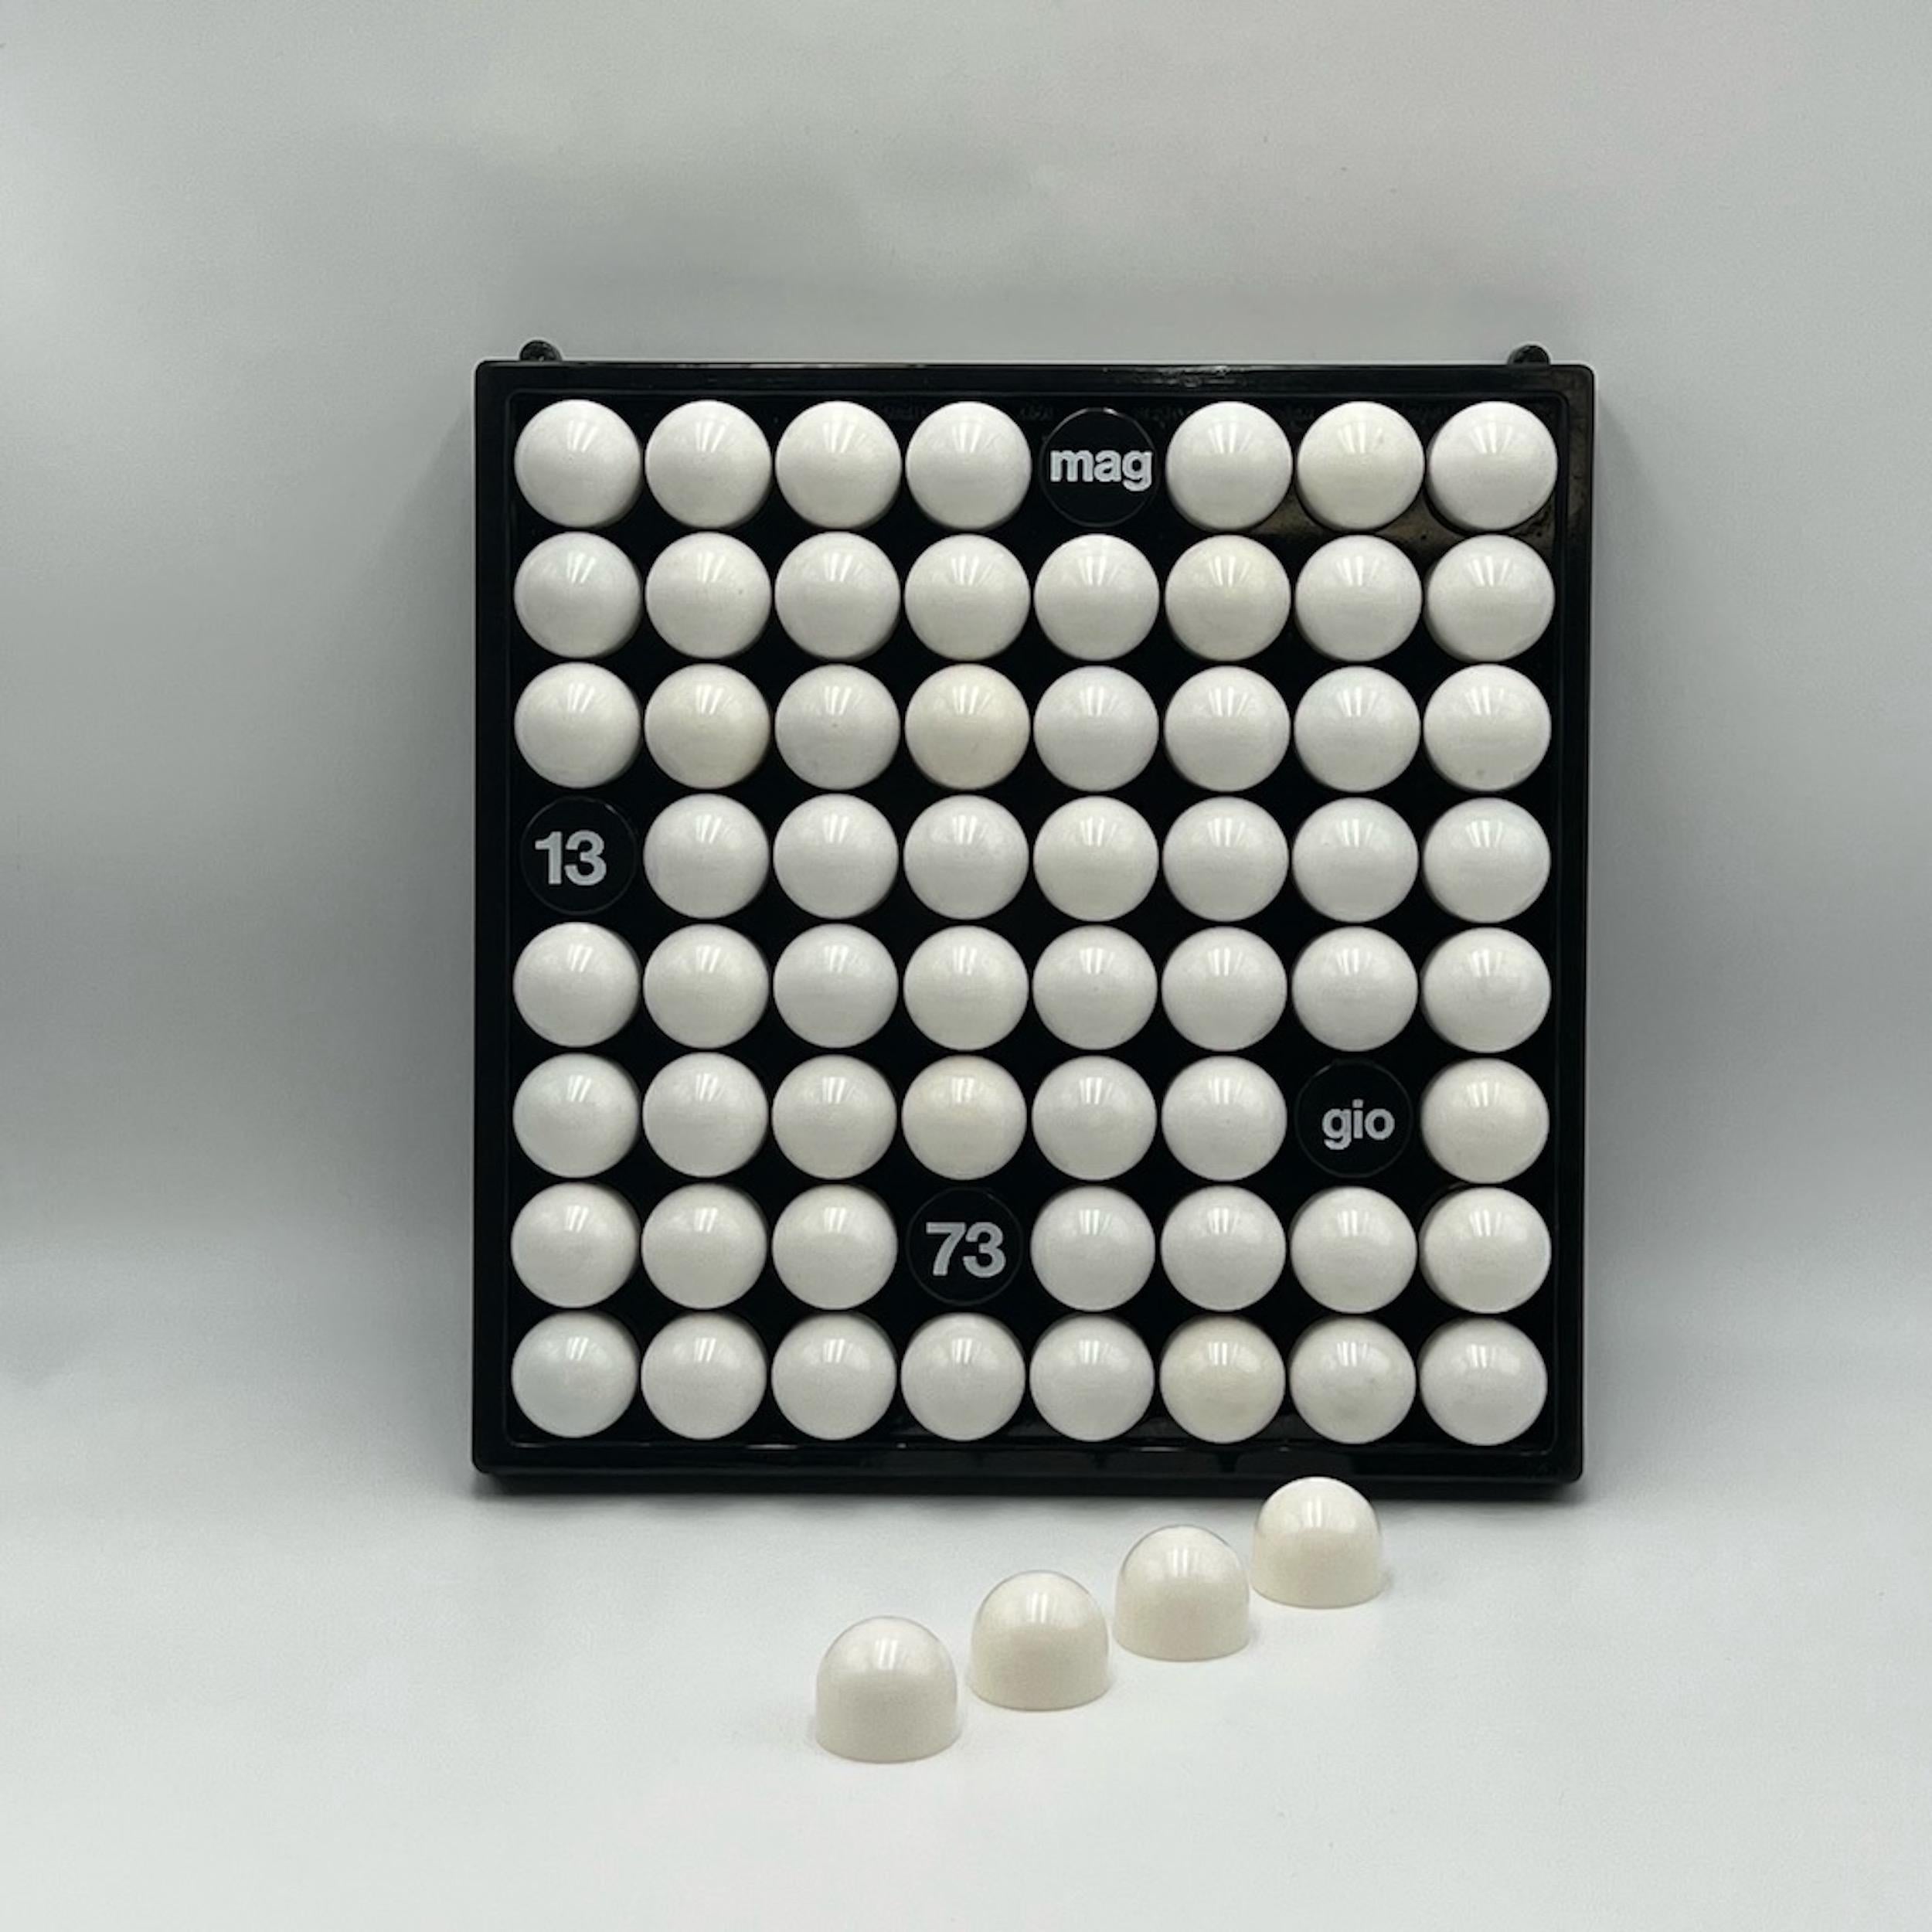 Unfindable wall calendar 'Wall Ball' made in Italy by Euroway Torino the 70s. A statement piece for those who appreciate the charm of space age era.

The “Wall Ball” square perpetual calendar made by Euroway Torino in the 1970s is a captivating and